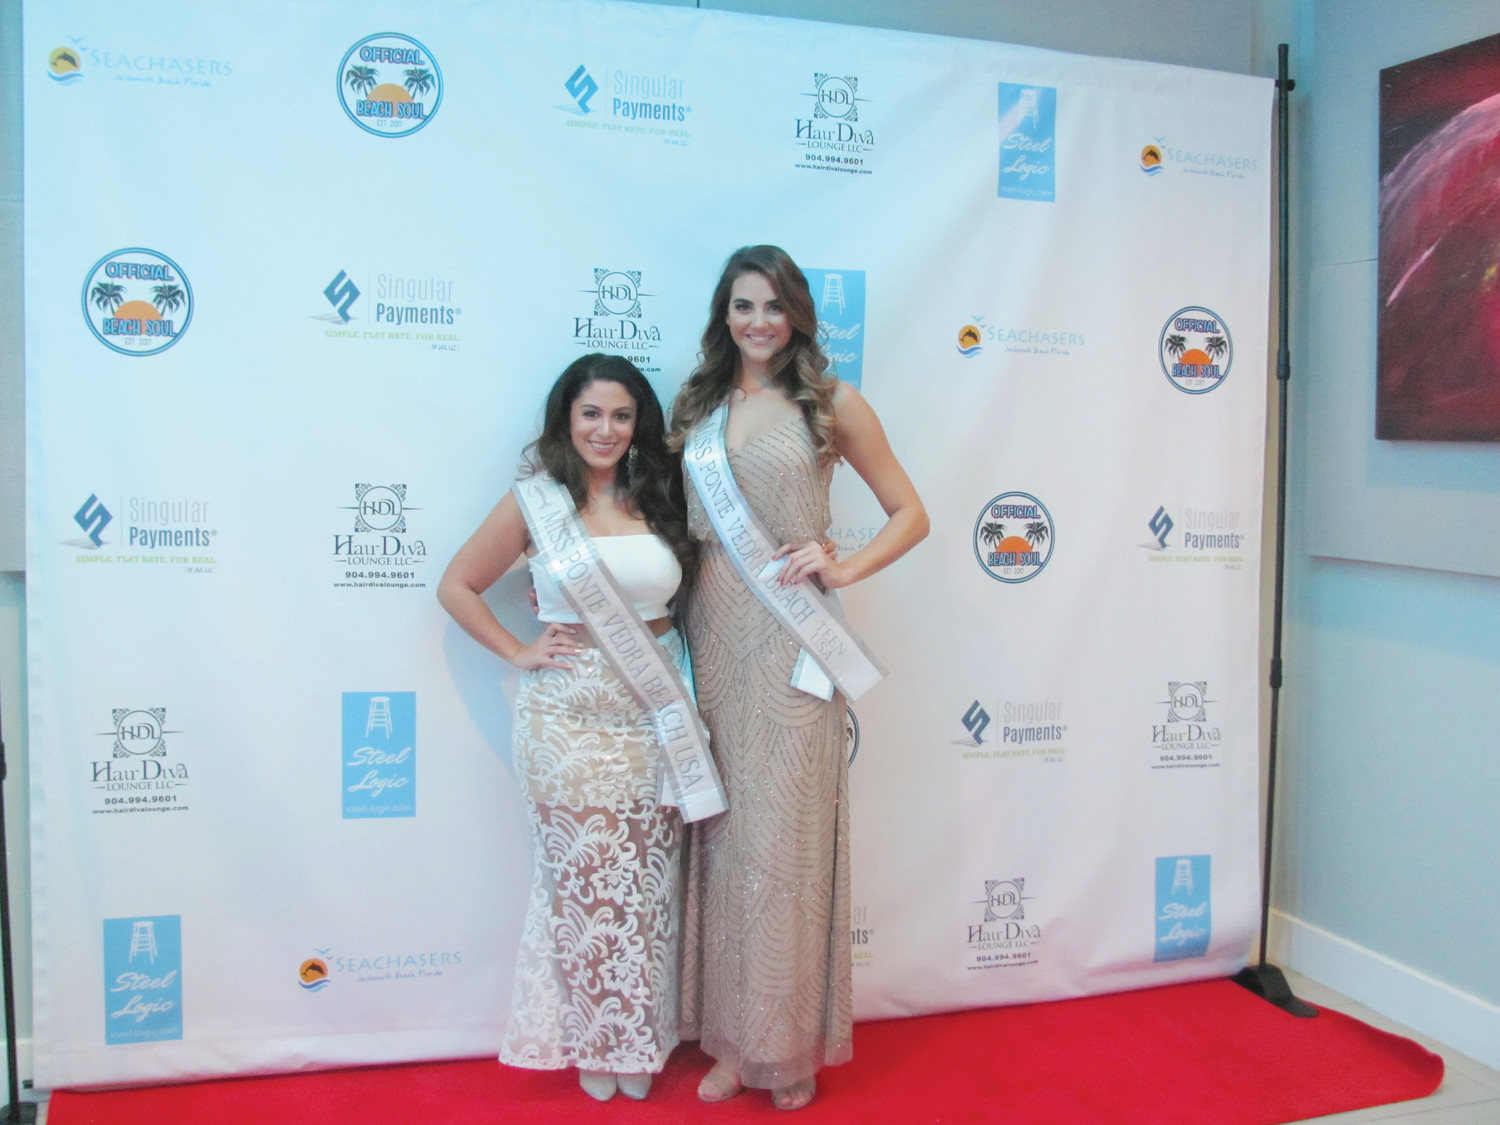 Miss Ponte Vedra Beach Natasha Gisela stands with Miss Teen Ponte Vedra Beach Olivia Fonville before a fundraising event last Friday.